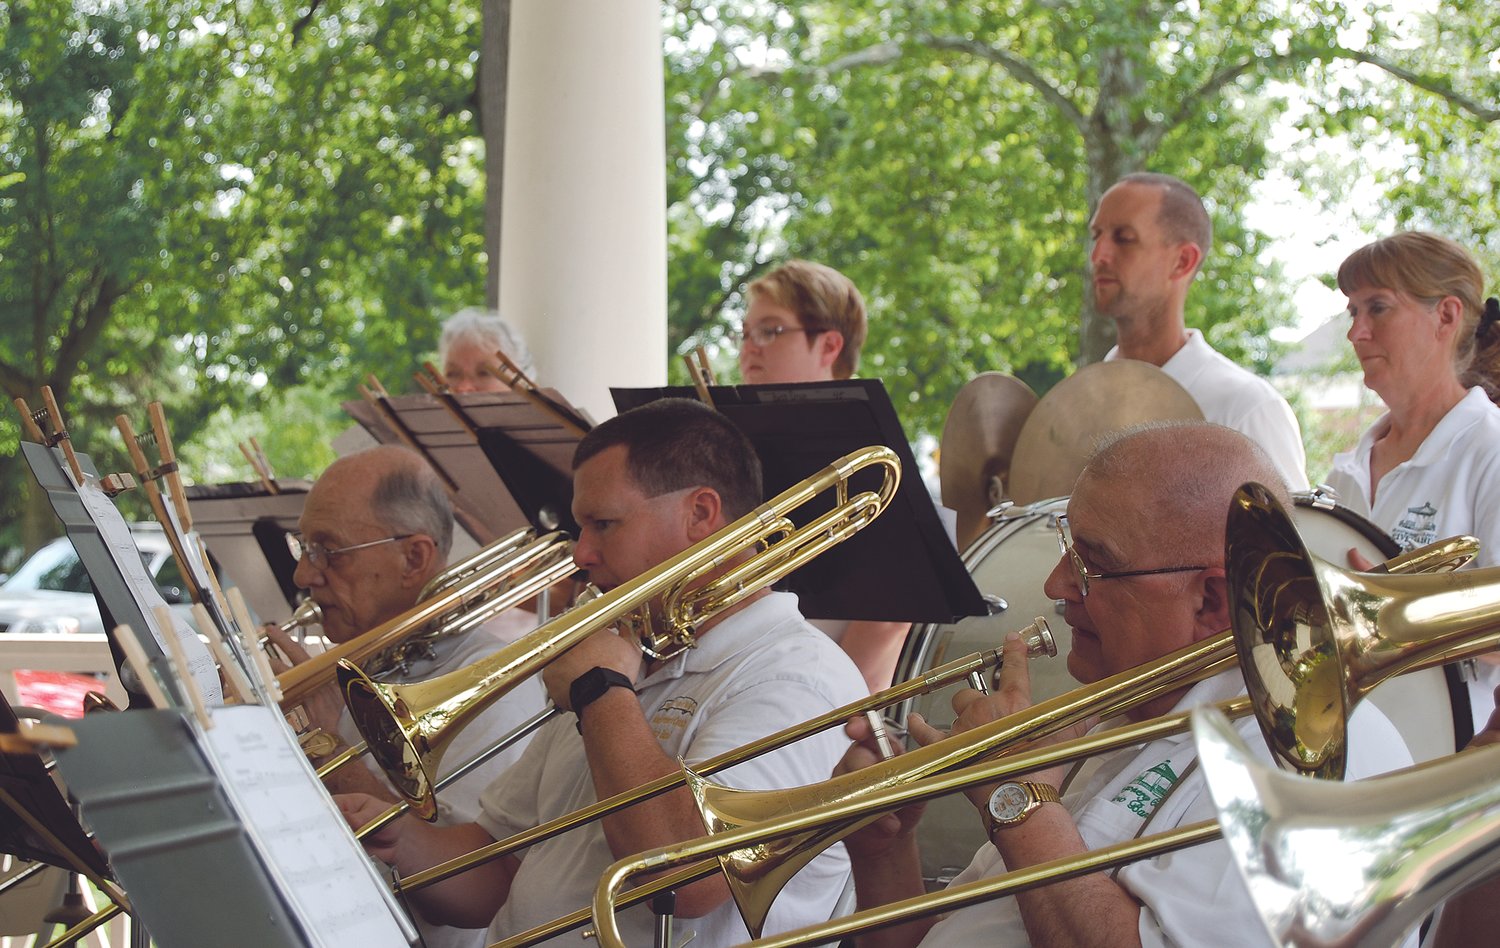 The Montgomery County Civic Band will open its season at 3 p.m. Sunday with a concert in the gazebo at Lane Place. Bring a lawn chair or blanket. The hour-long concert is free, but donations are welcome.